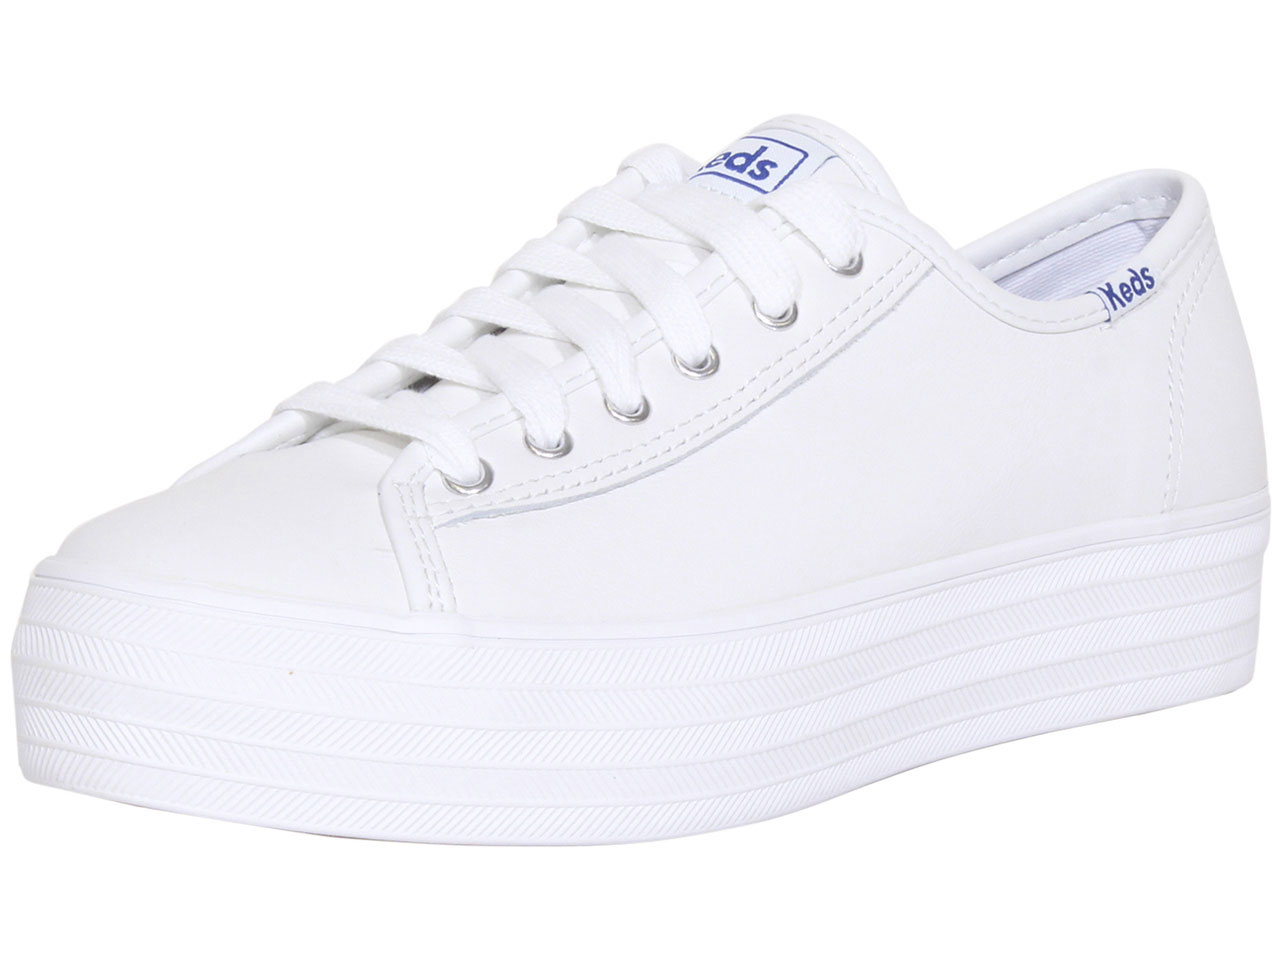 Keds Women's Triple-Kick-Leather Sneakers Lace-Up Shoes Low-Top White ...